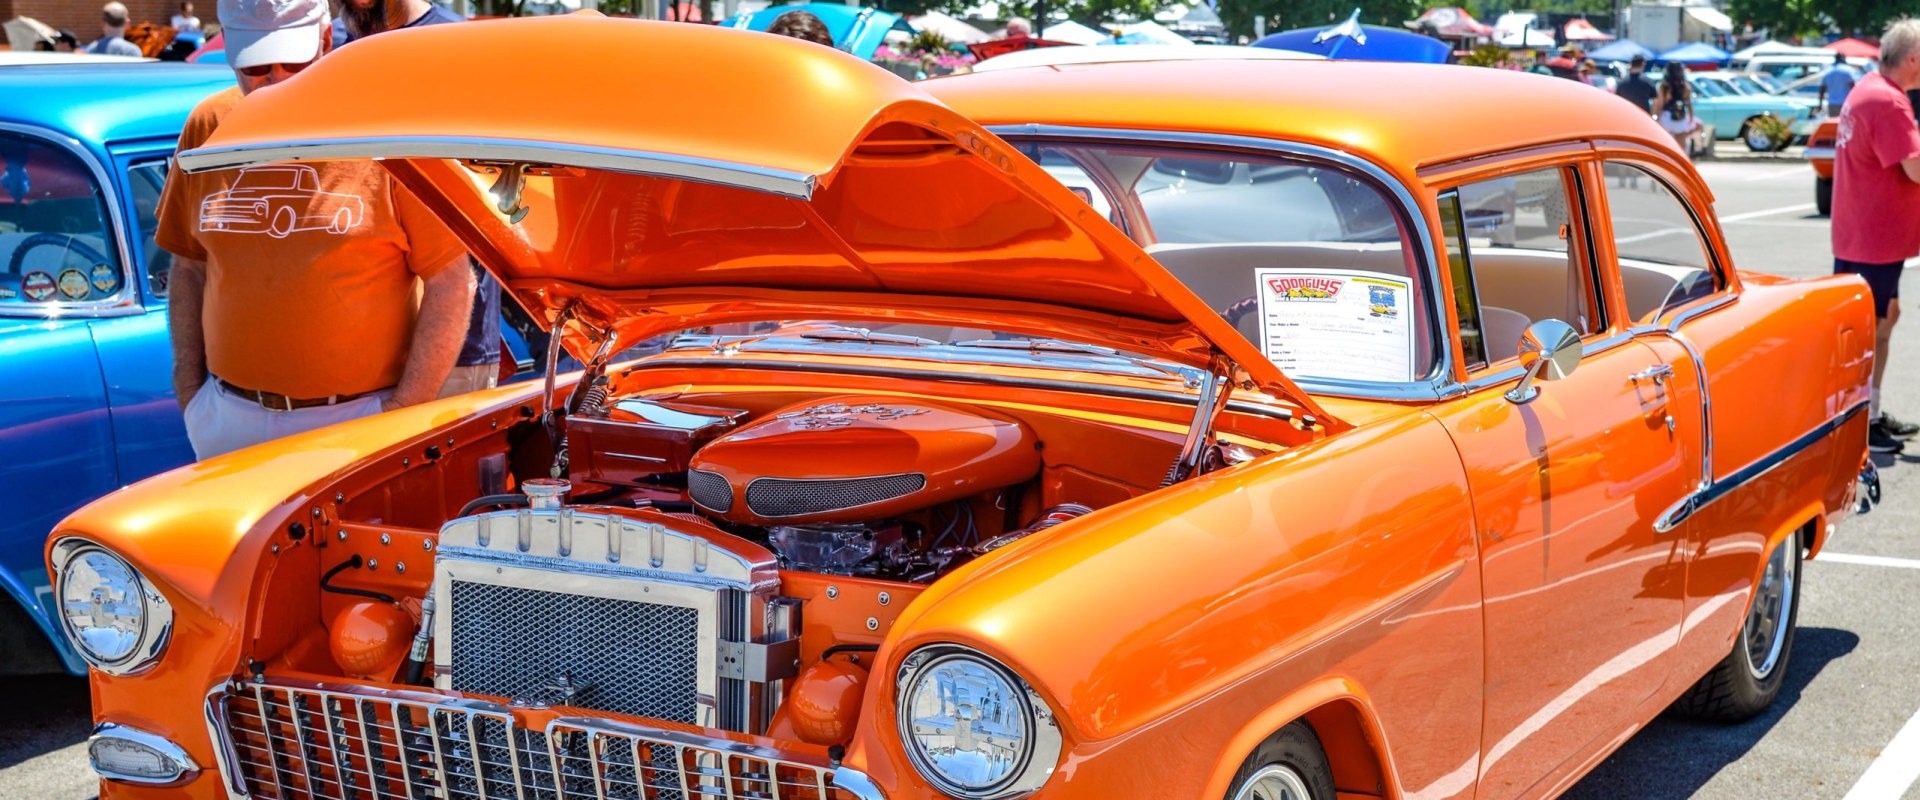 Tune-up Tips for Classic Car Restoration